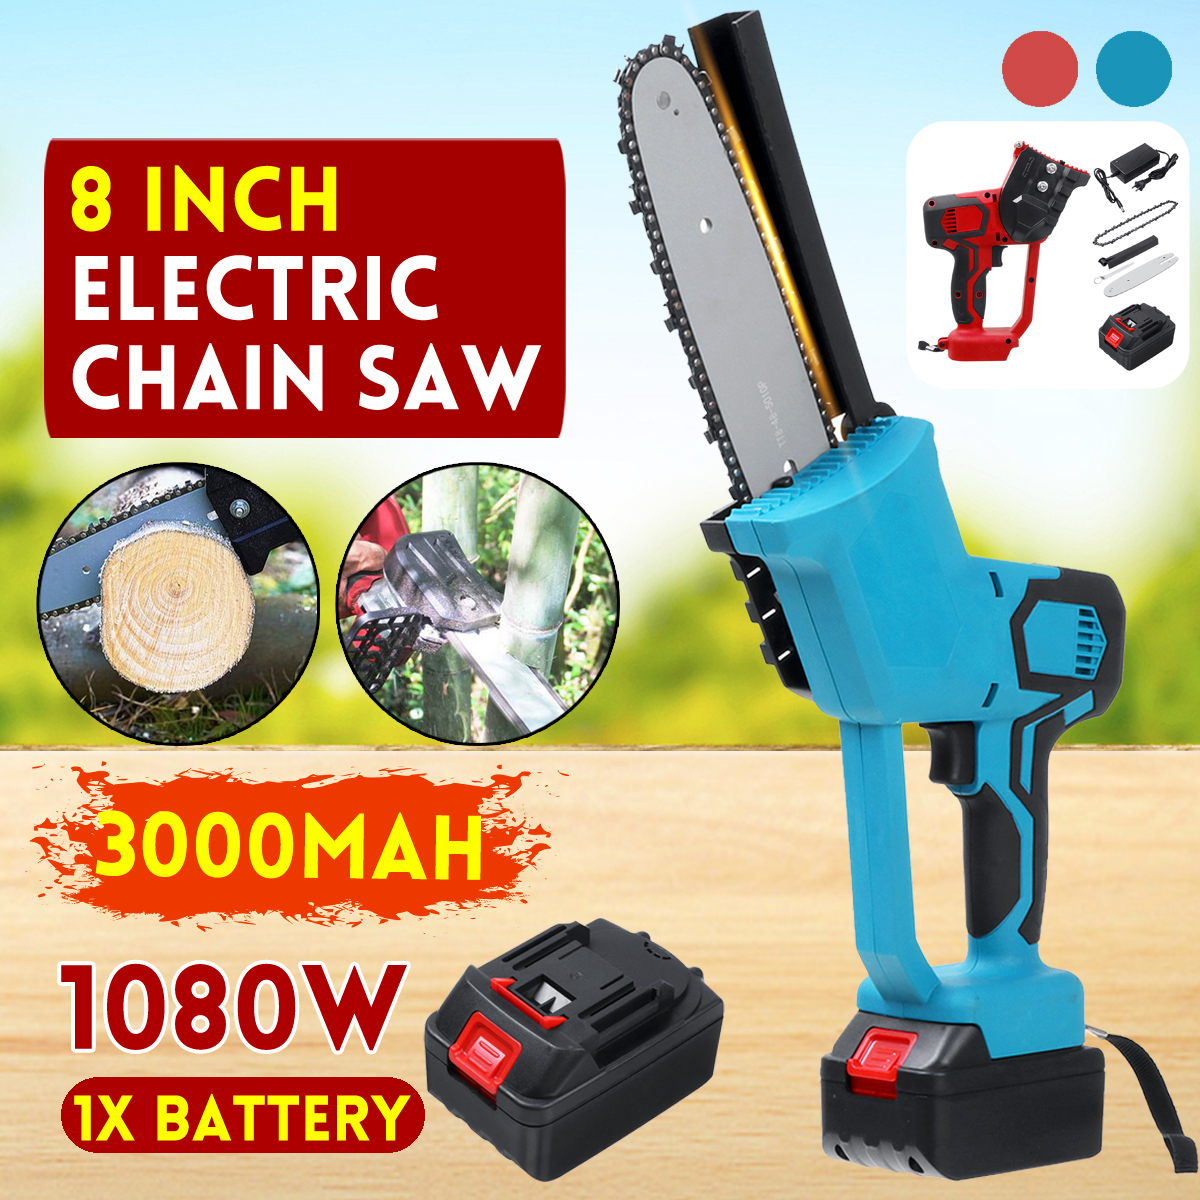 1080W-8-Inch-Electric-Cordless-Chainsaw-Chain-Saw-Handheld-Garden-Wood-Cutting-Tool-W-None1pc-Batter-1829229-1